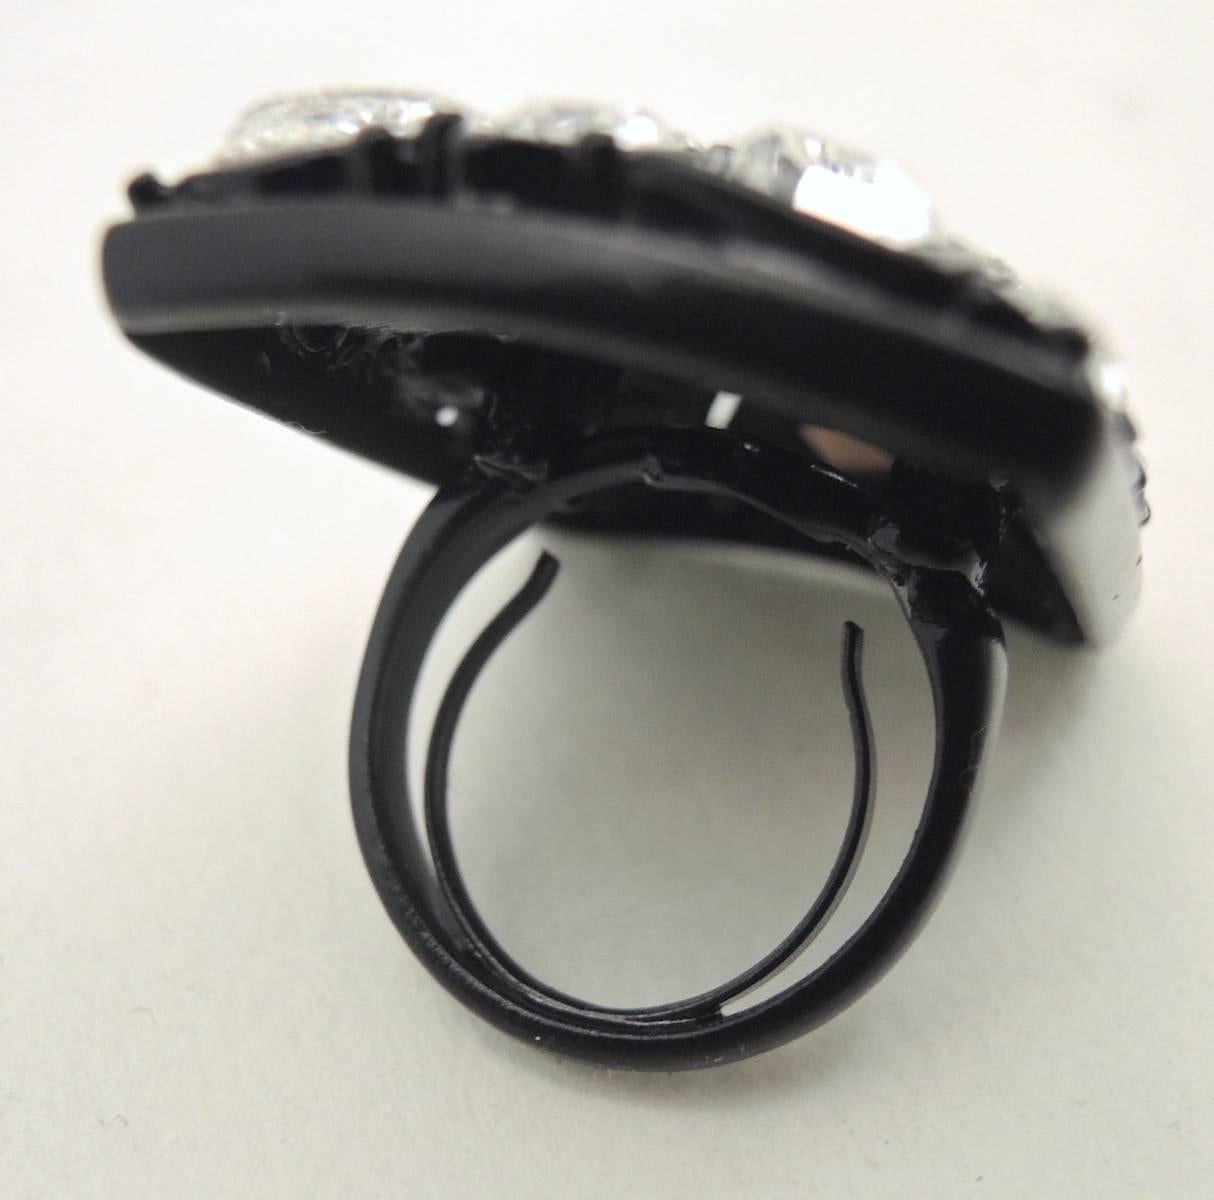 This is a dramatic and large sized rectangle crystal ring. The crystals are made in different shapes on black enameling over metal. It measures 1-1/2” x 1-1/4”. The ring is adjustable up to a size 7 and signed “Kenneth Lane”.  It is in excellent